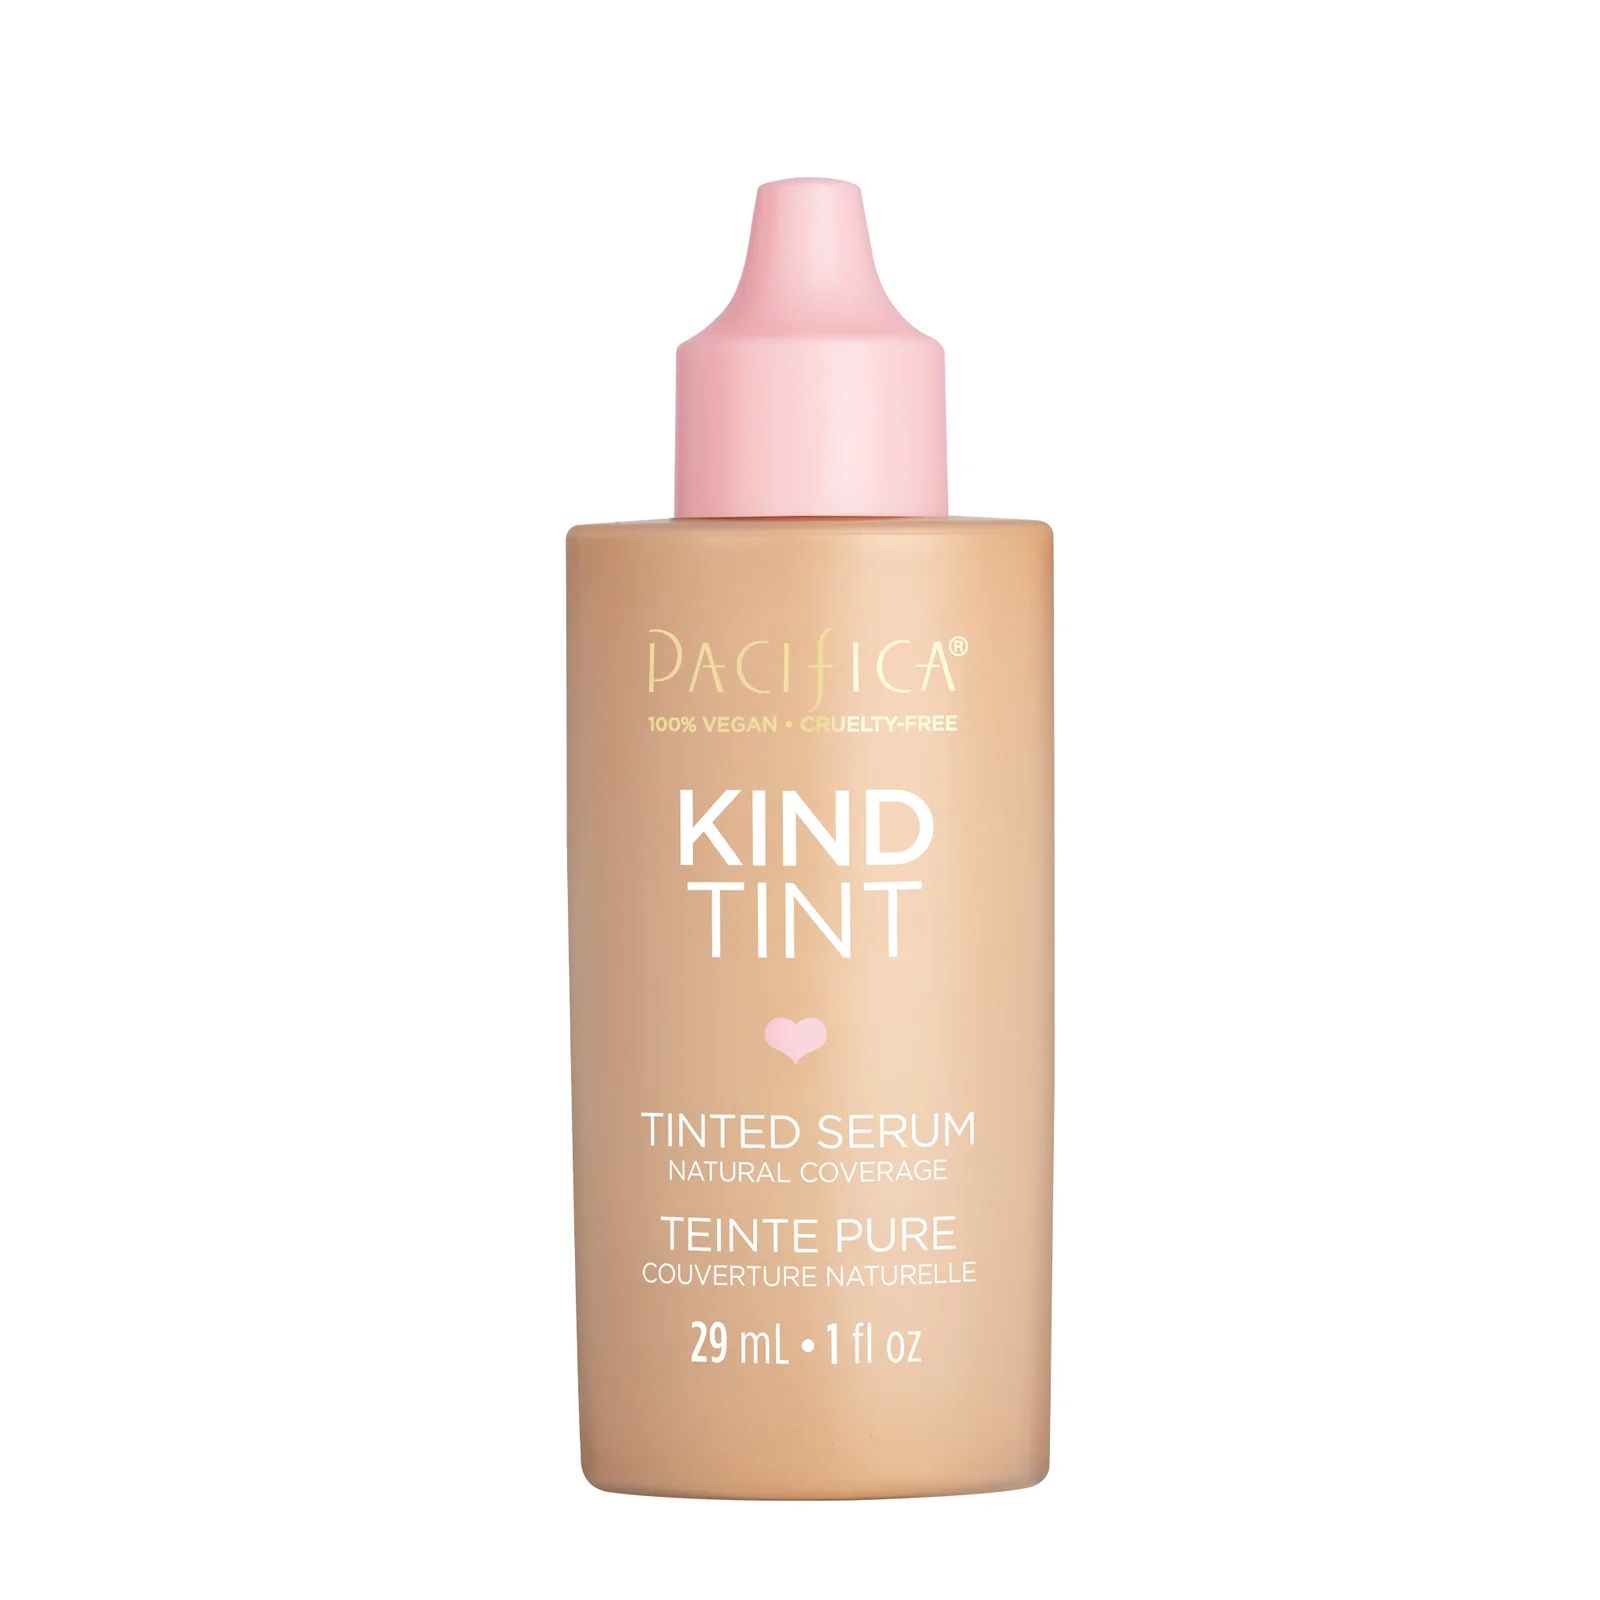 Kind Tint Tinted Serum | Pacifica Beauty